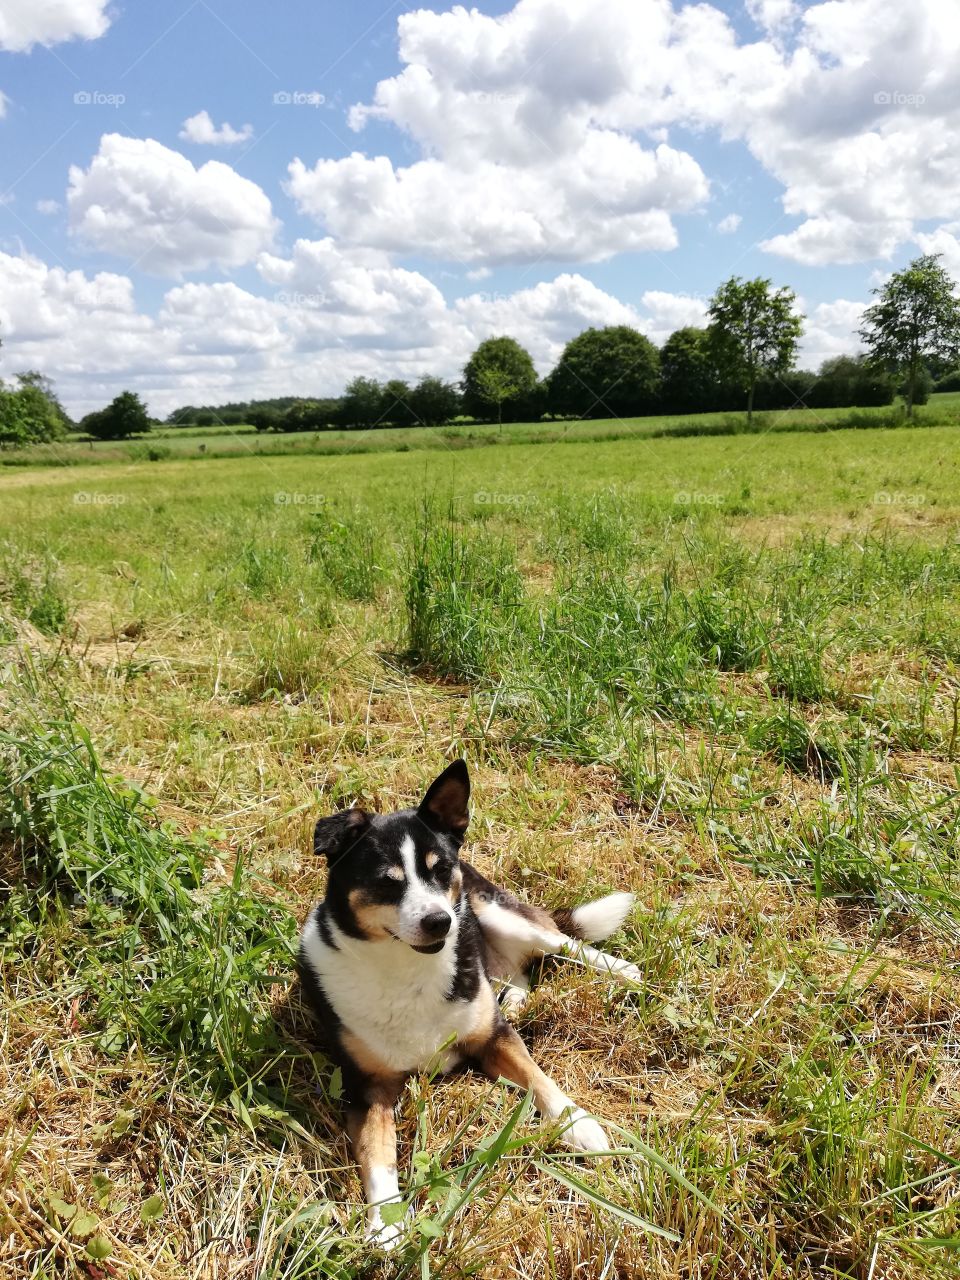 Dog lying in a field with green grass and blue sky with clouds in the background